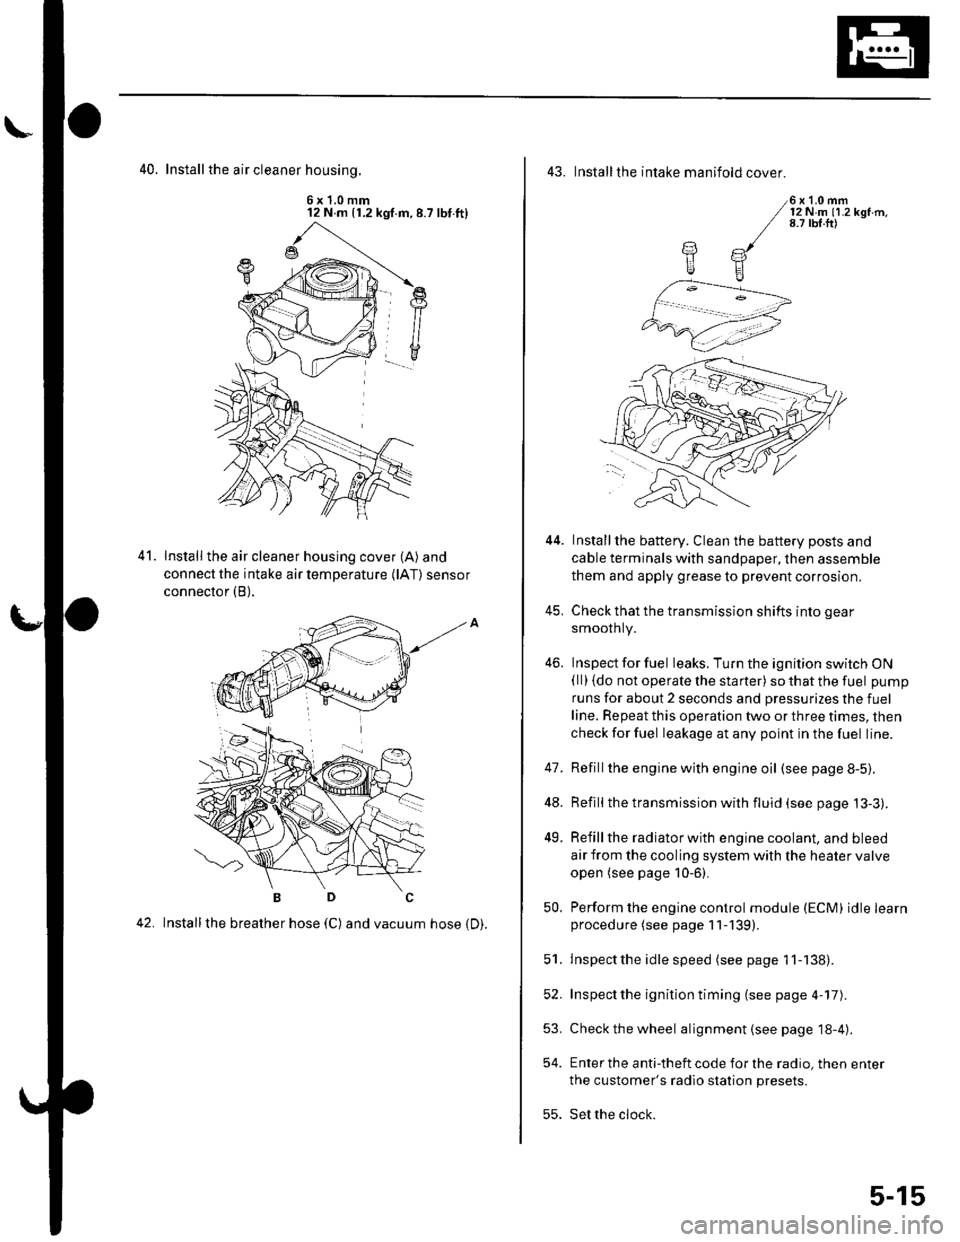 HONDA CIVIC 2003 7.G User Guide 40. Install the air cleaner housinq.
6x1.0mm12 N m (1.2 kgf.m,8.7 lbt.ft)
Install the air cleaner housing cover (A) and
connect the intake air temperature (lAT) sensor
connector (B),
42. Installthe br